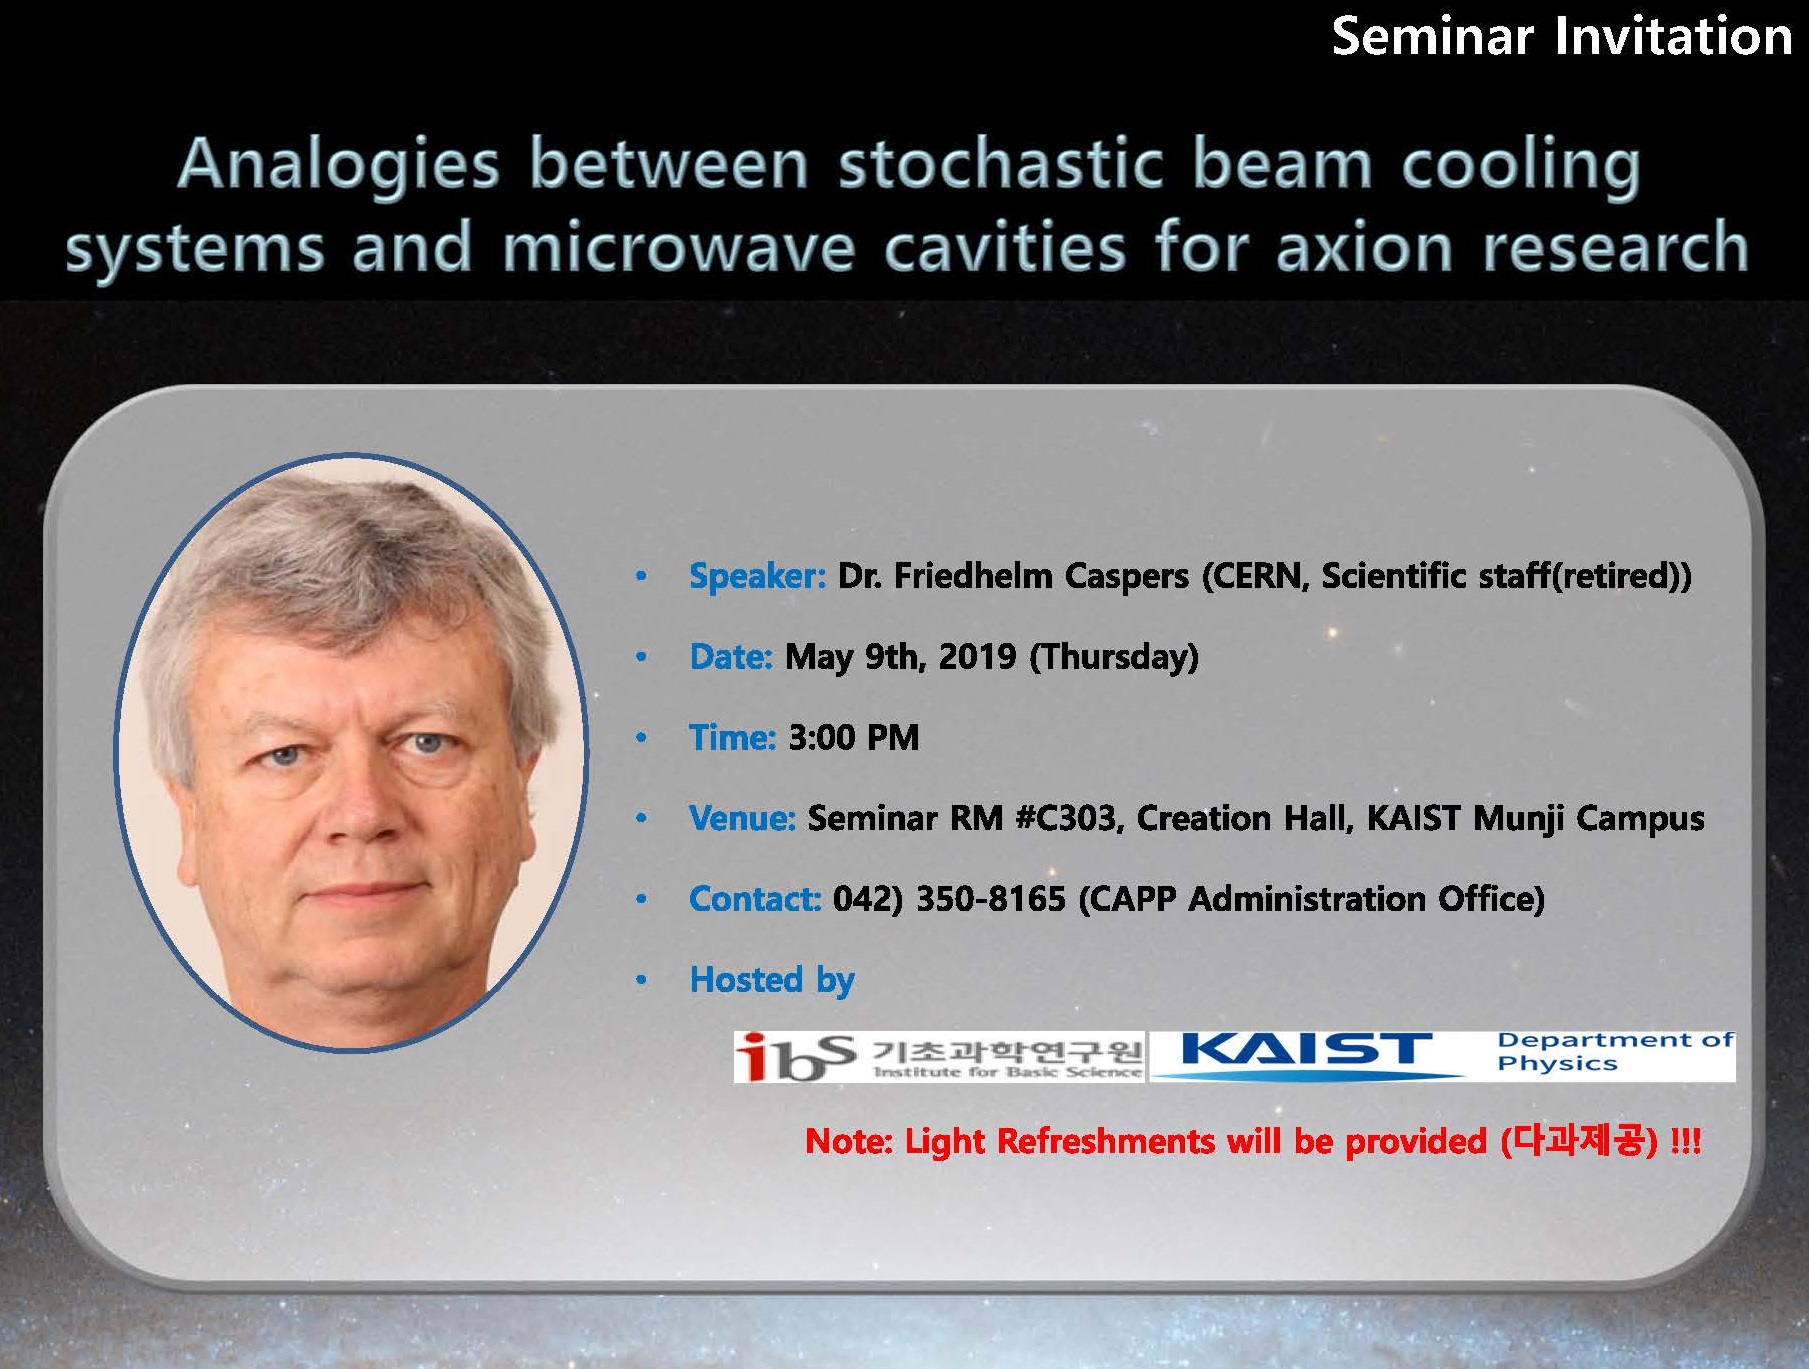 [CAPP Seminar] Analogies between stochastic beam cooling systems and microwave cavities for axion research/Comparison of stochastic beam cooling electronics including EMC aspects with axions search cavity methods